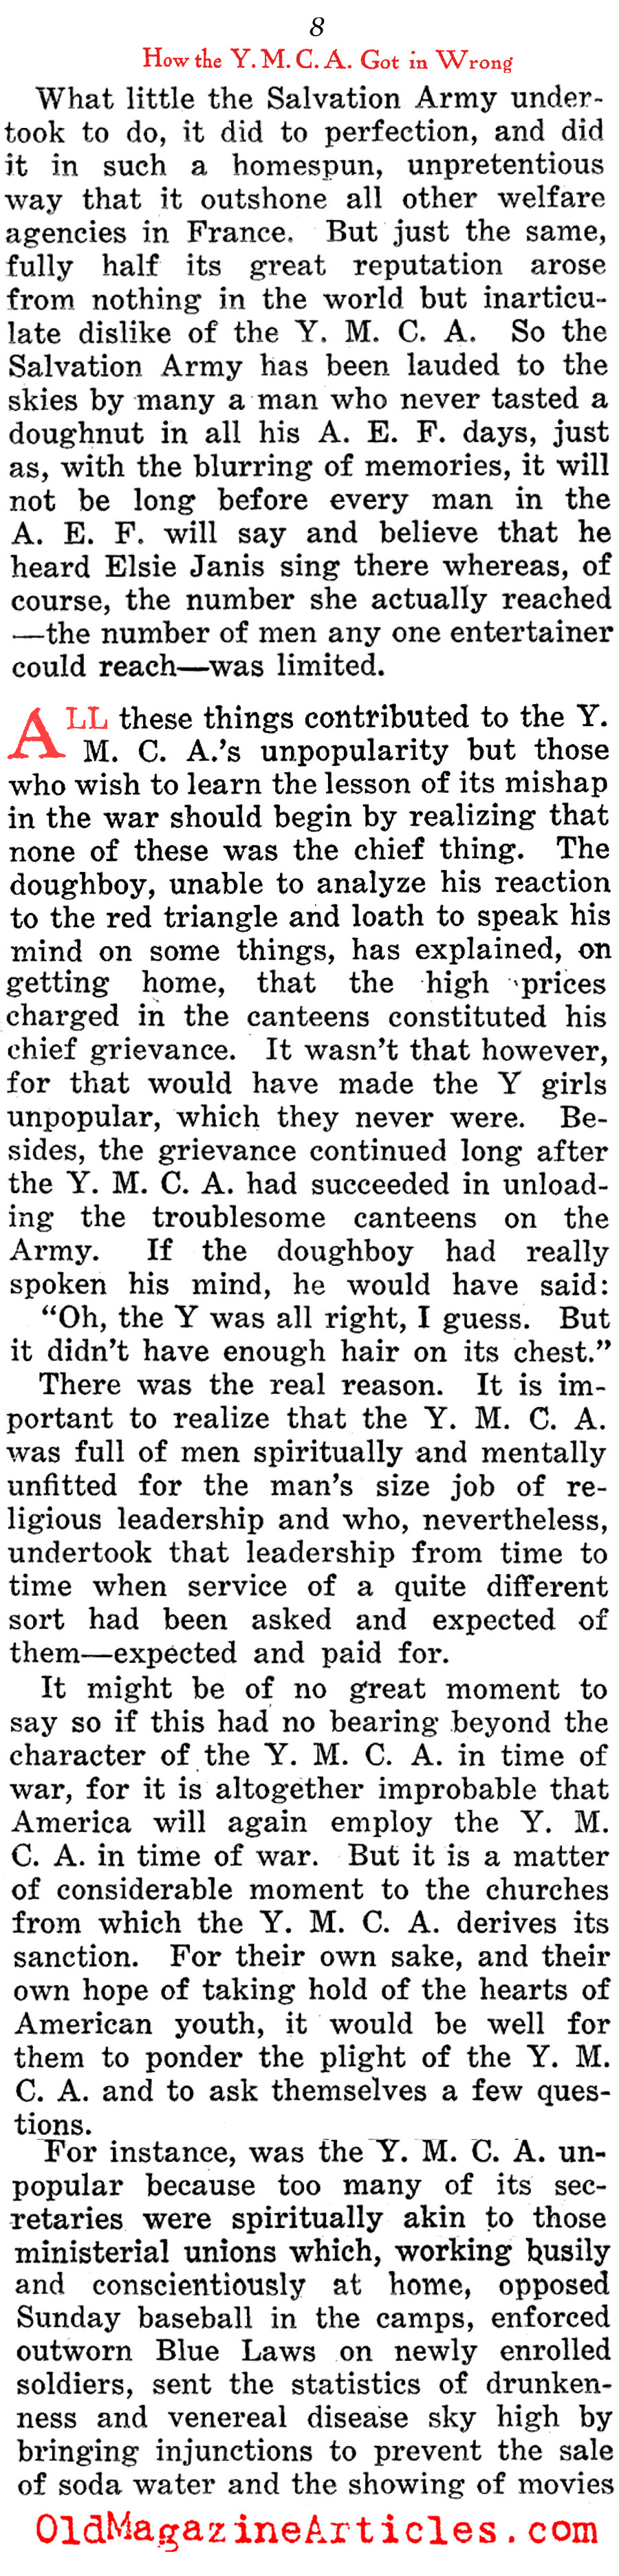 How the YMCA Got it Wrong (The Home Sector, 1919) 